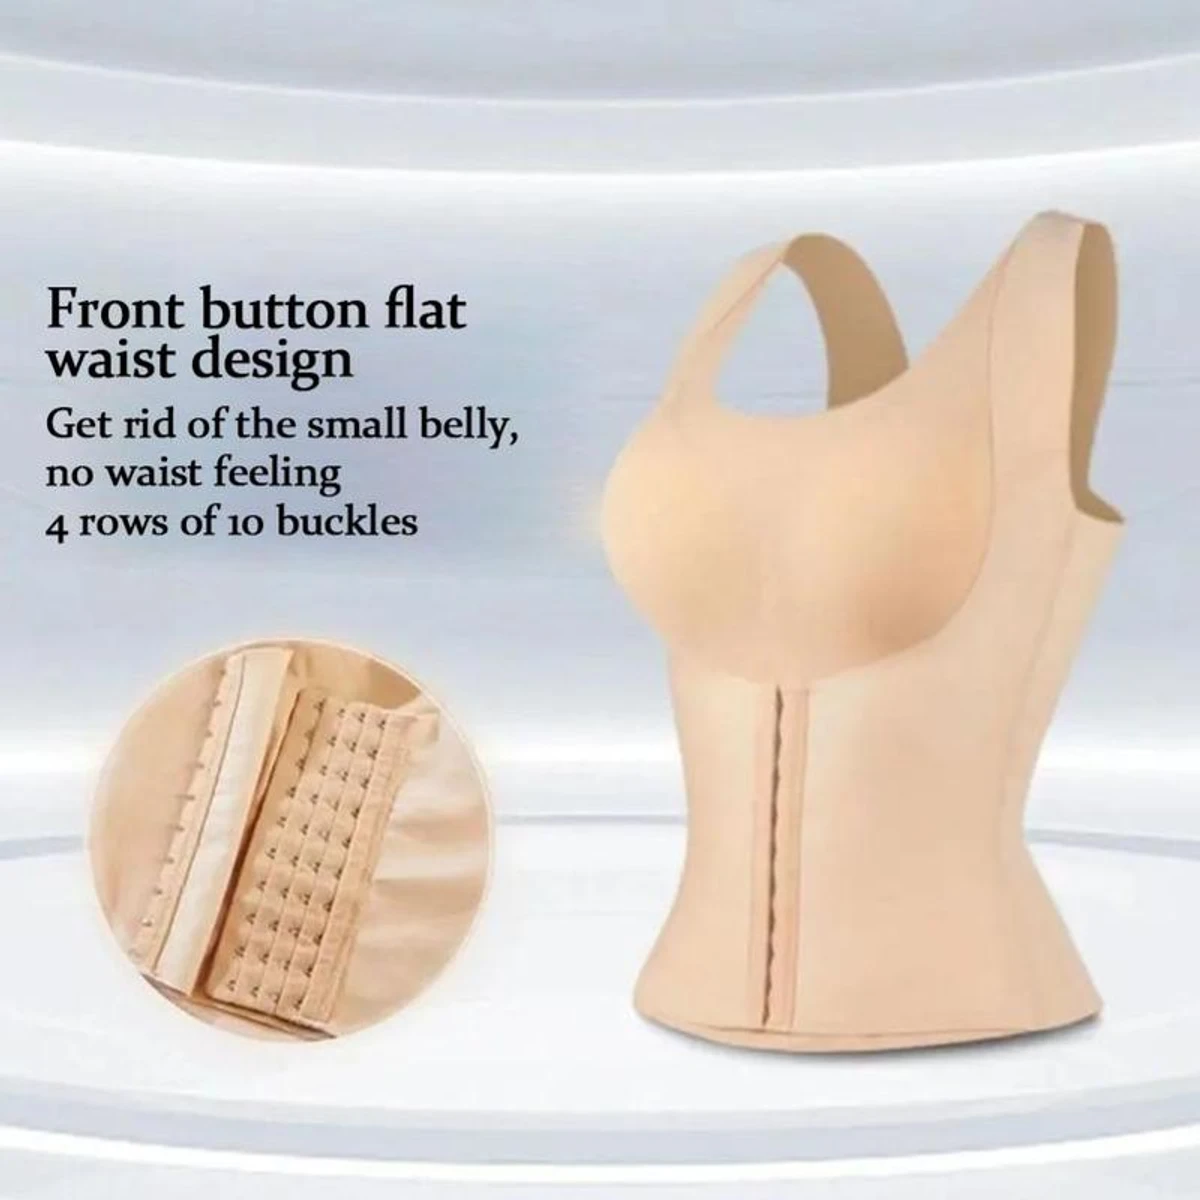 Breast And Belly Shaper Bra